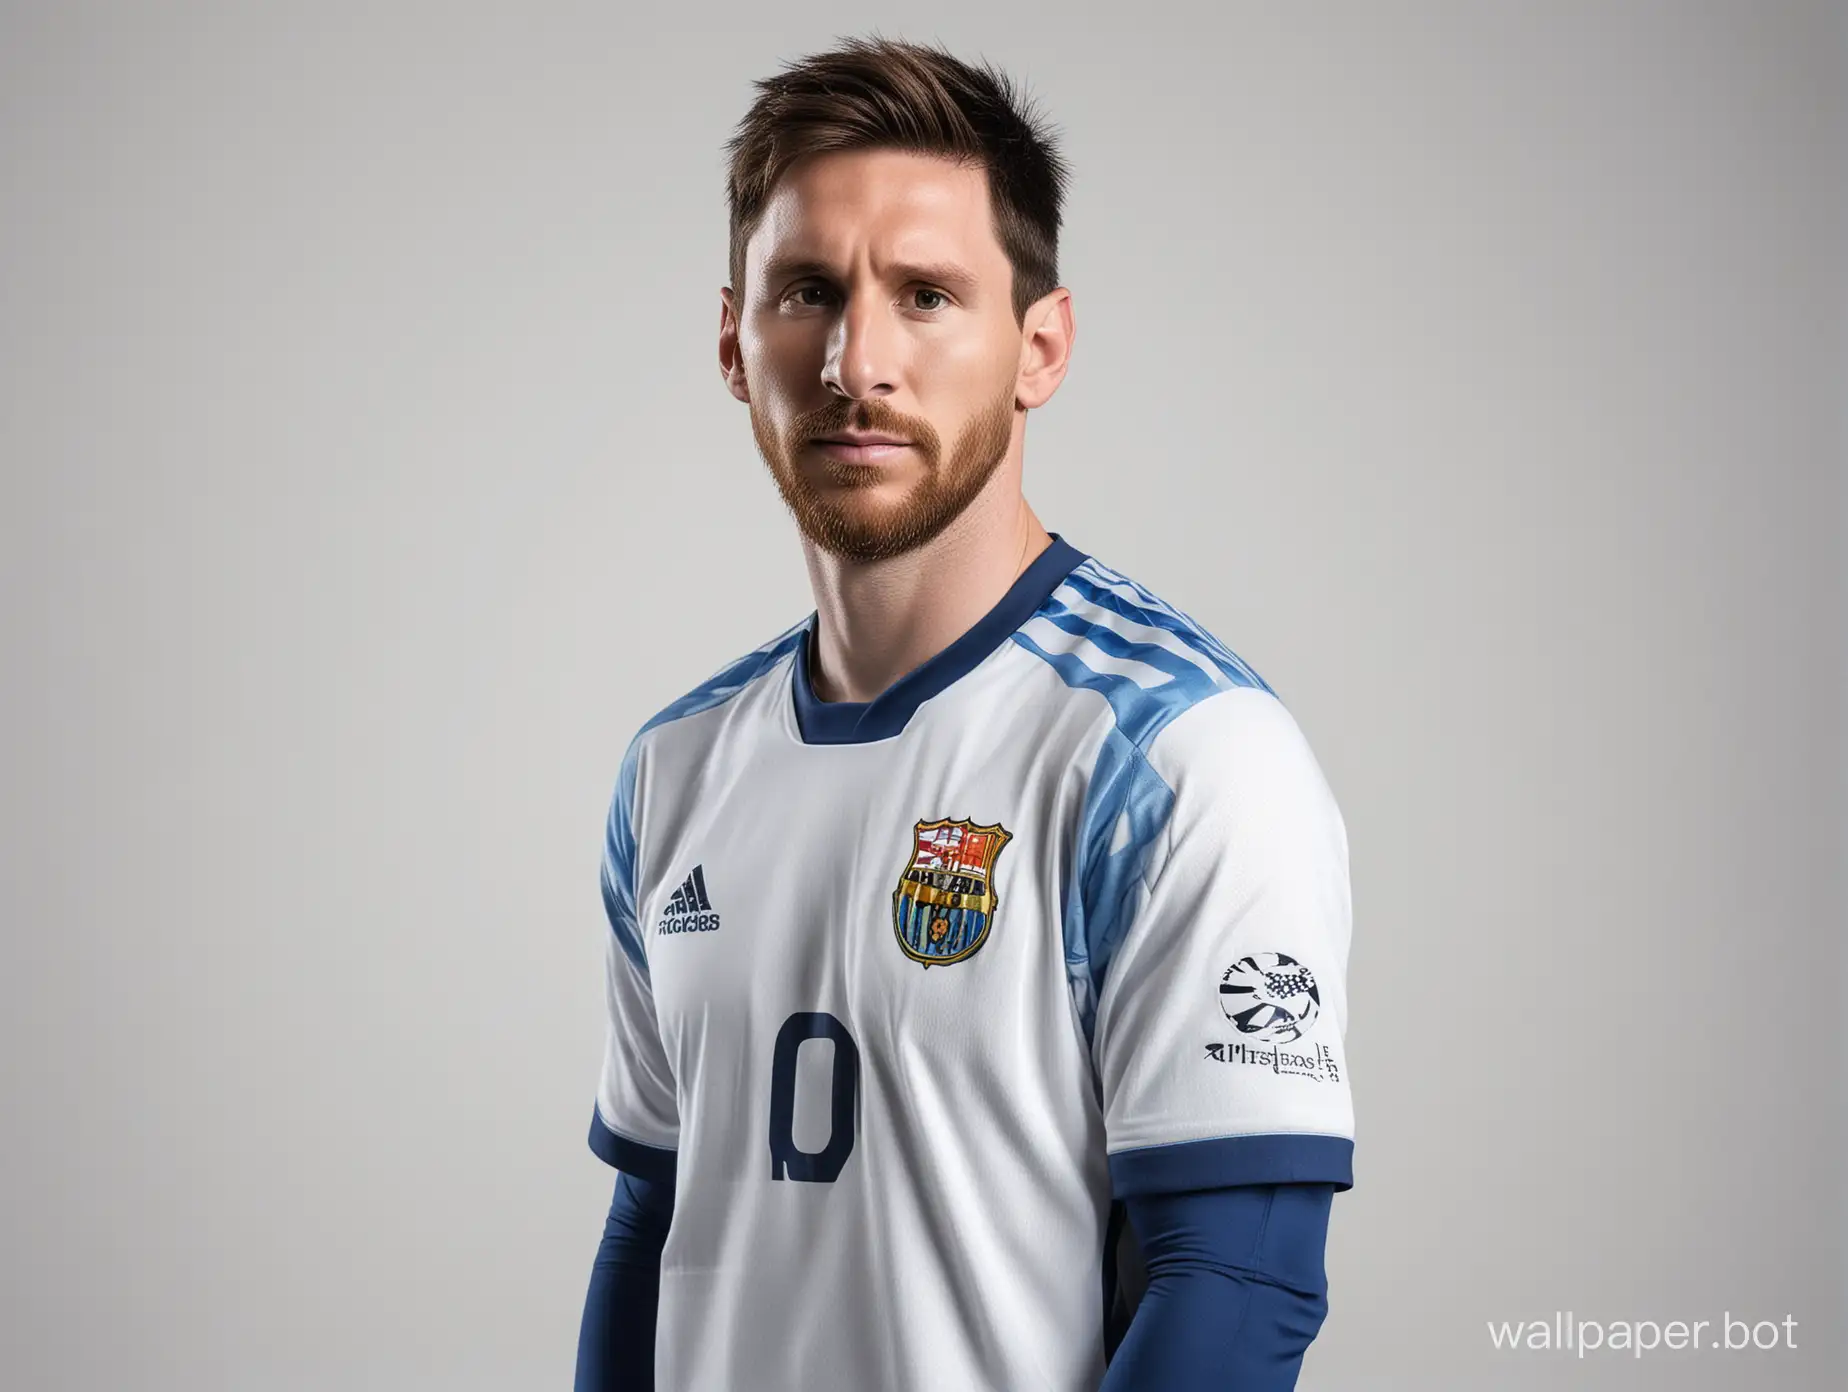 Lionel-Messi-Soccer-Portrait-Iconic-30YearOld-Athlete-in-White-and-Blue-Uniform